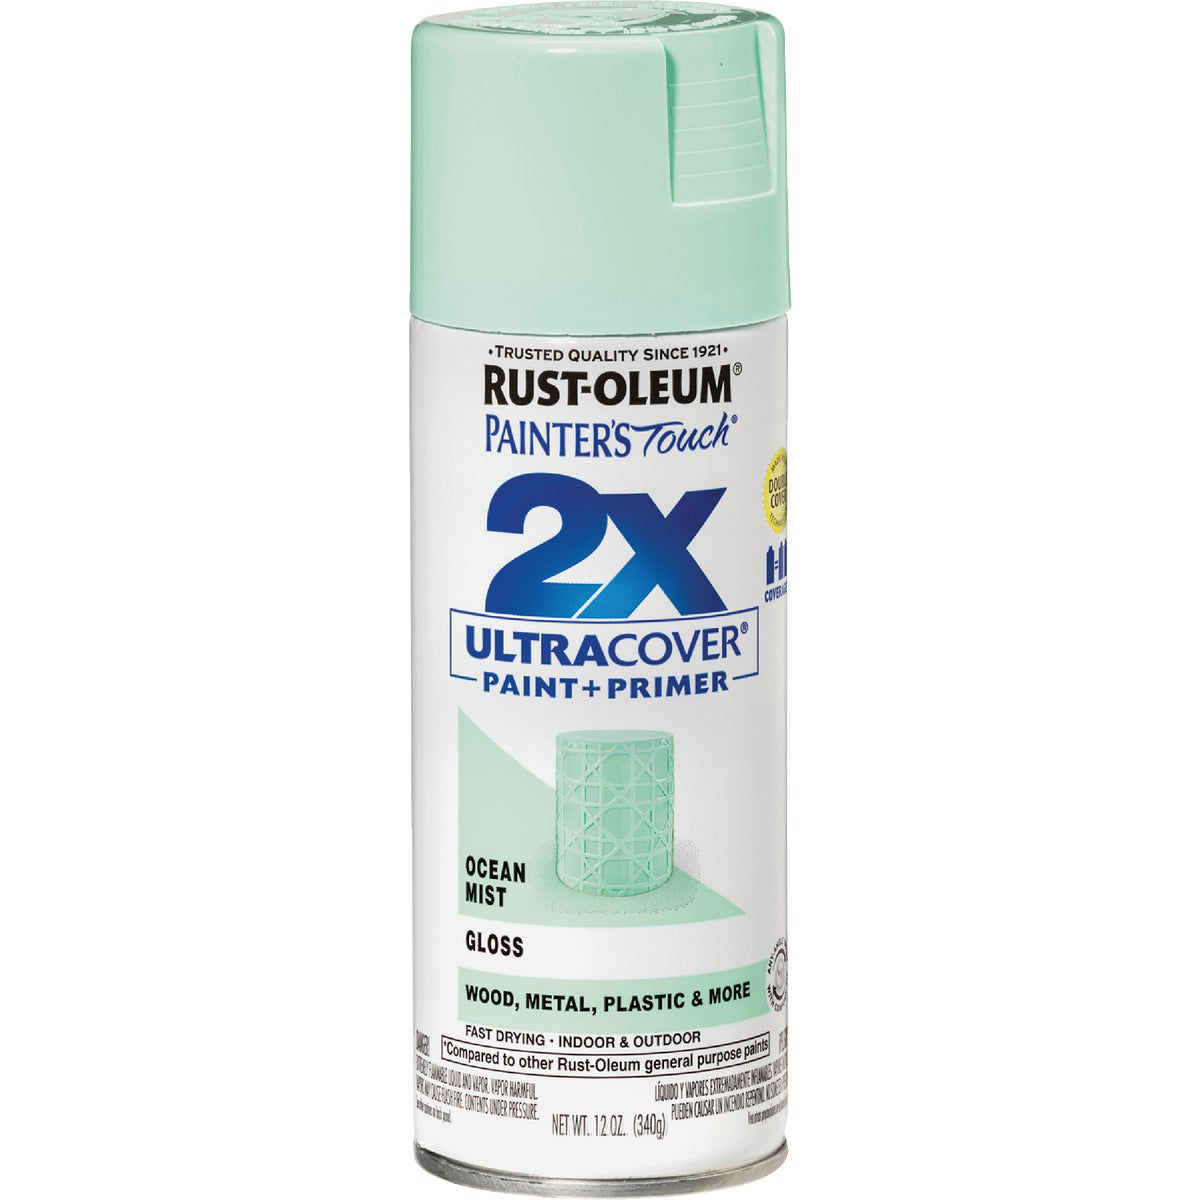 Rust-Oleum Painter's Touch 2x 12 oz. Gloss Spring Green General Purpose Spray Paint (6-pack)